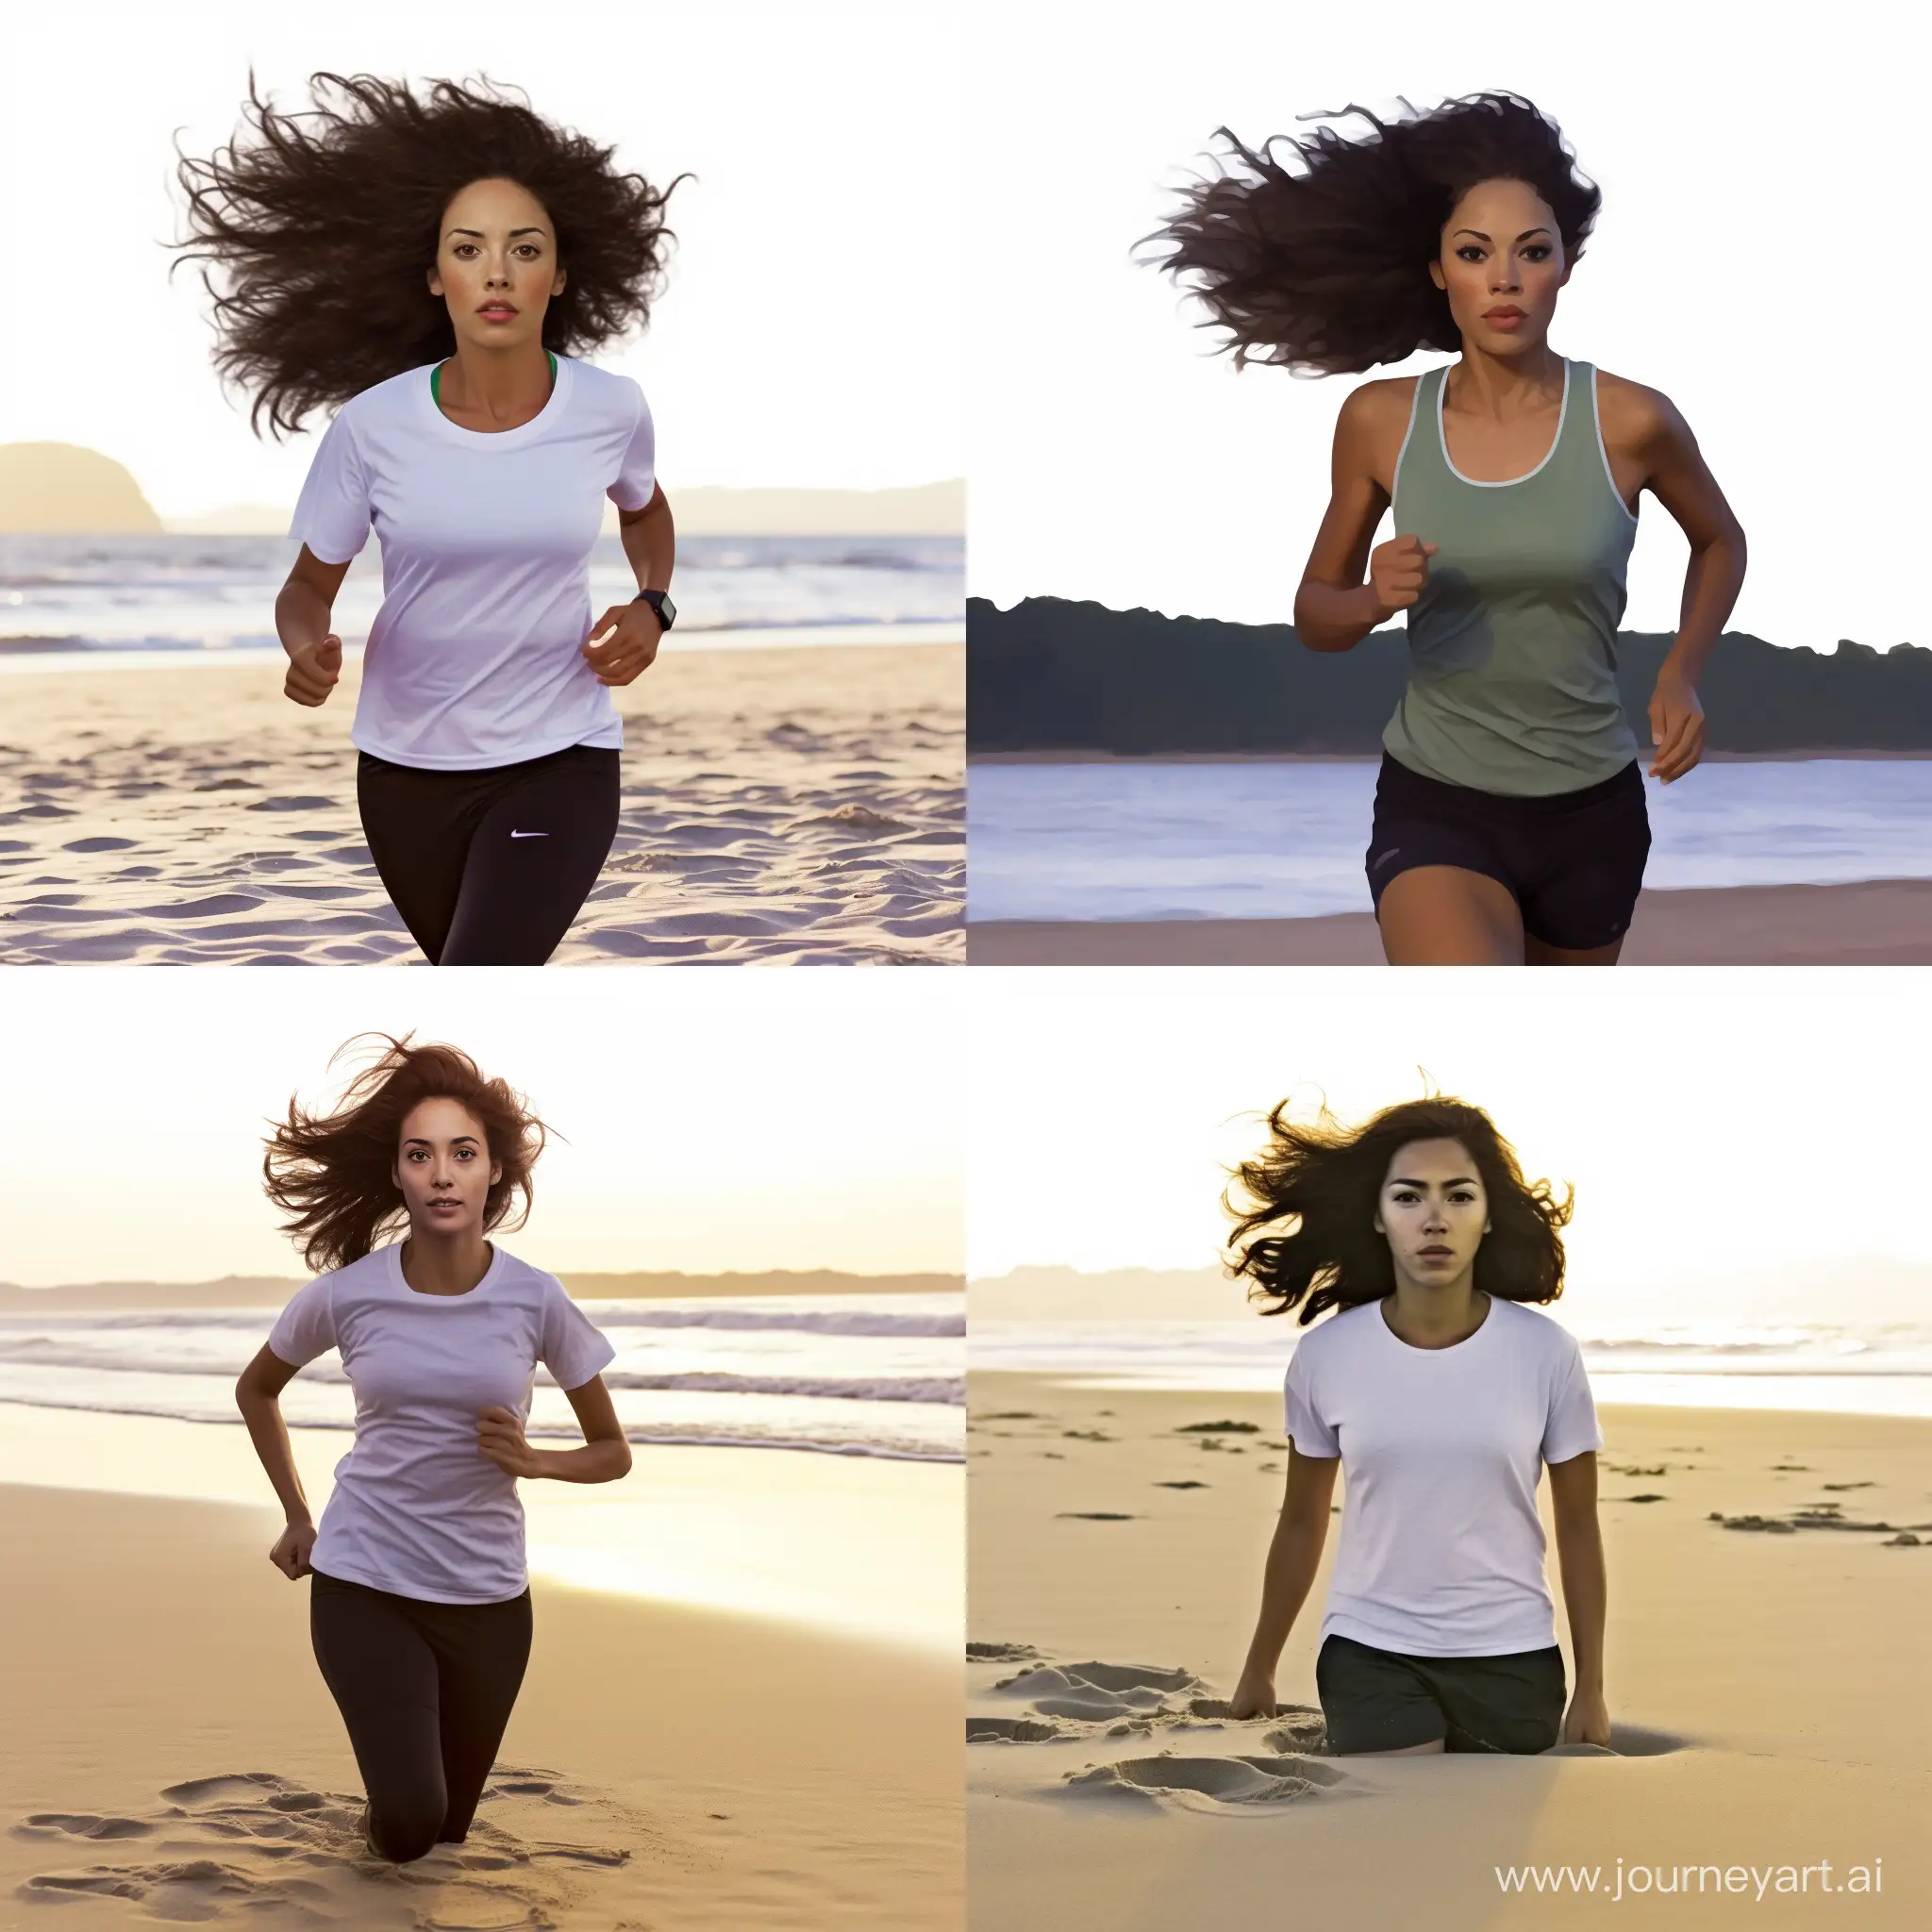 realistic portrait photo of beautiful woman with black hair, brown skin, influencer, light freckles, green eyes, running on the beach with a white t-shirt